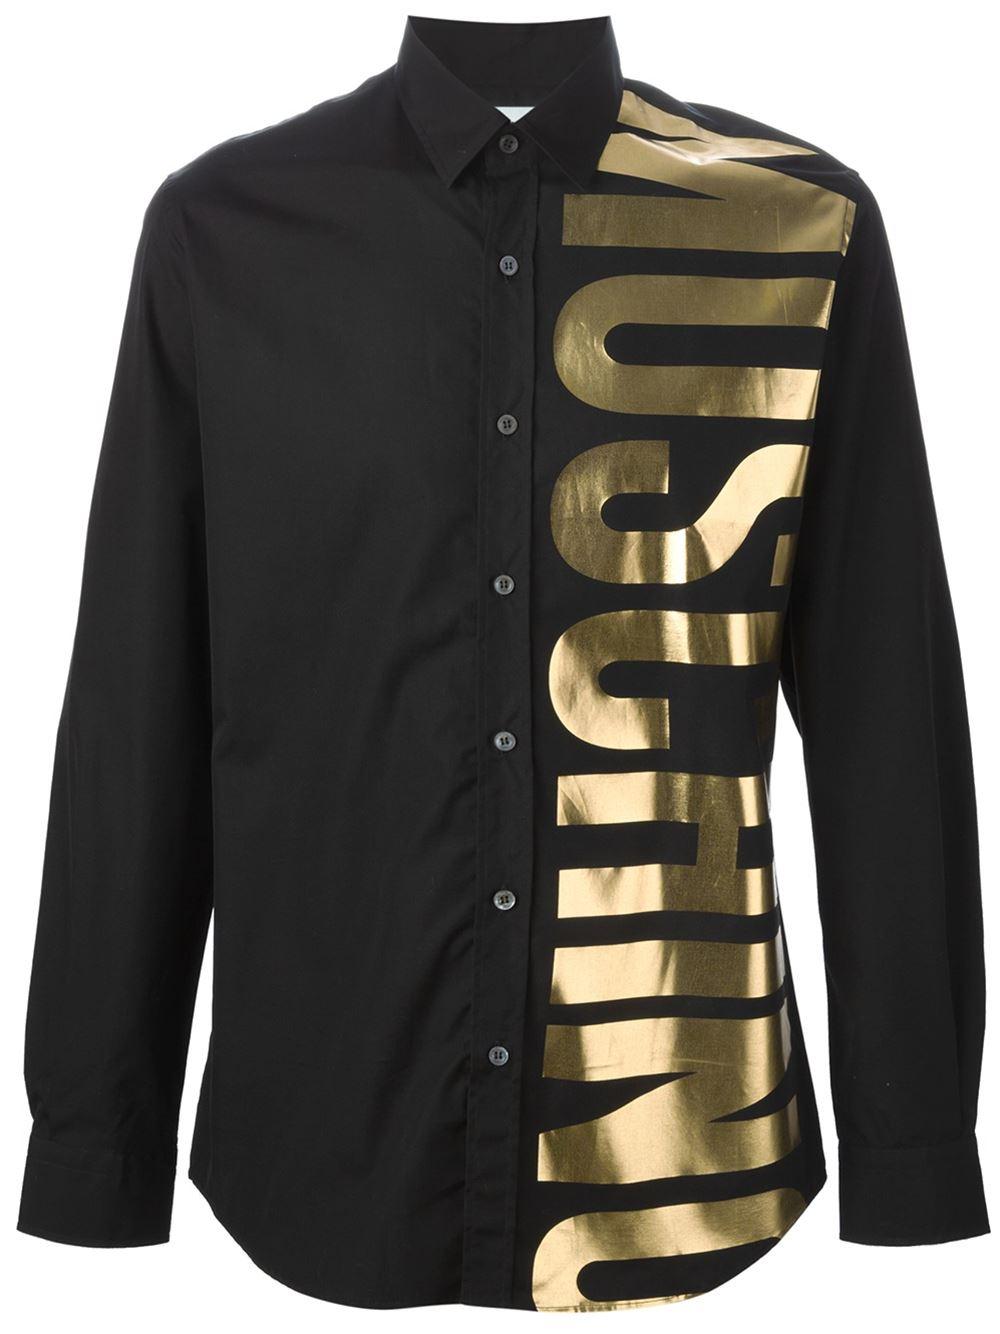 Moschino Gold Logo - Rapper French Montana Parties In A Moschino Gold Logo Long Sleeve